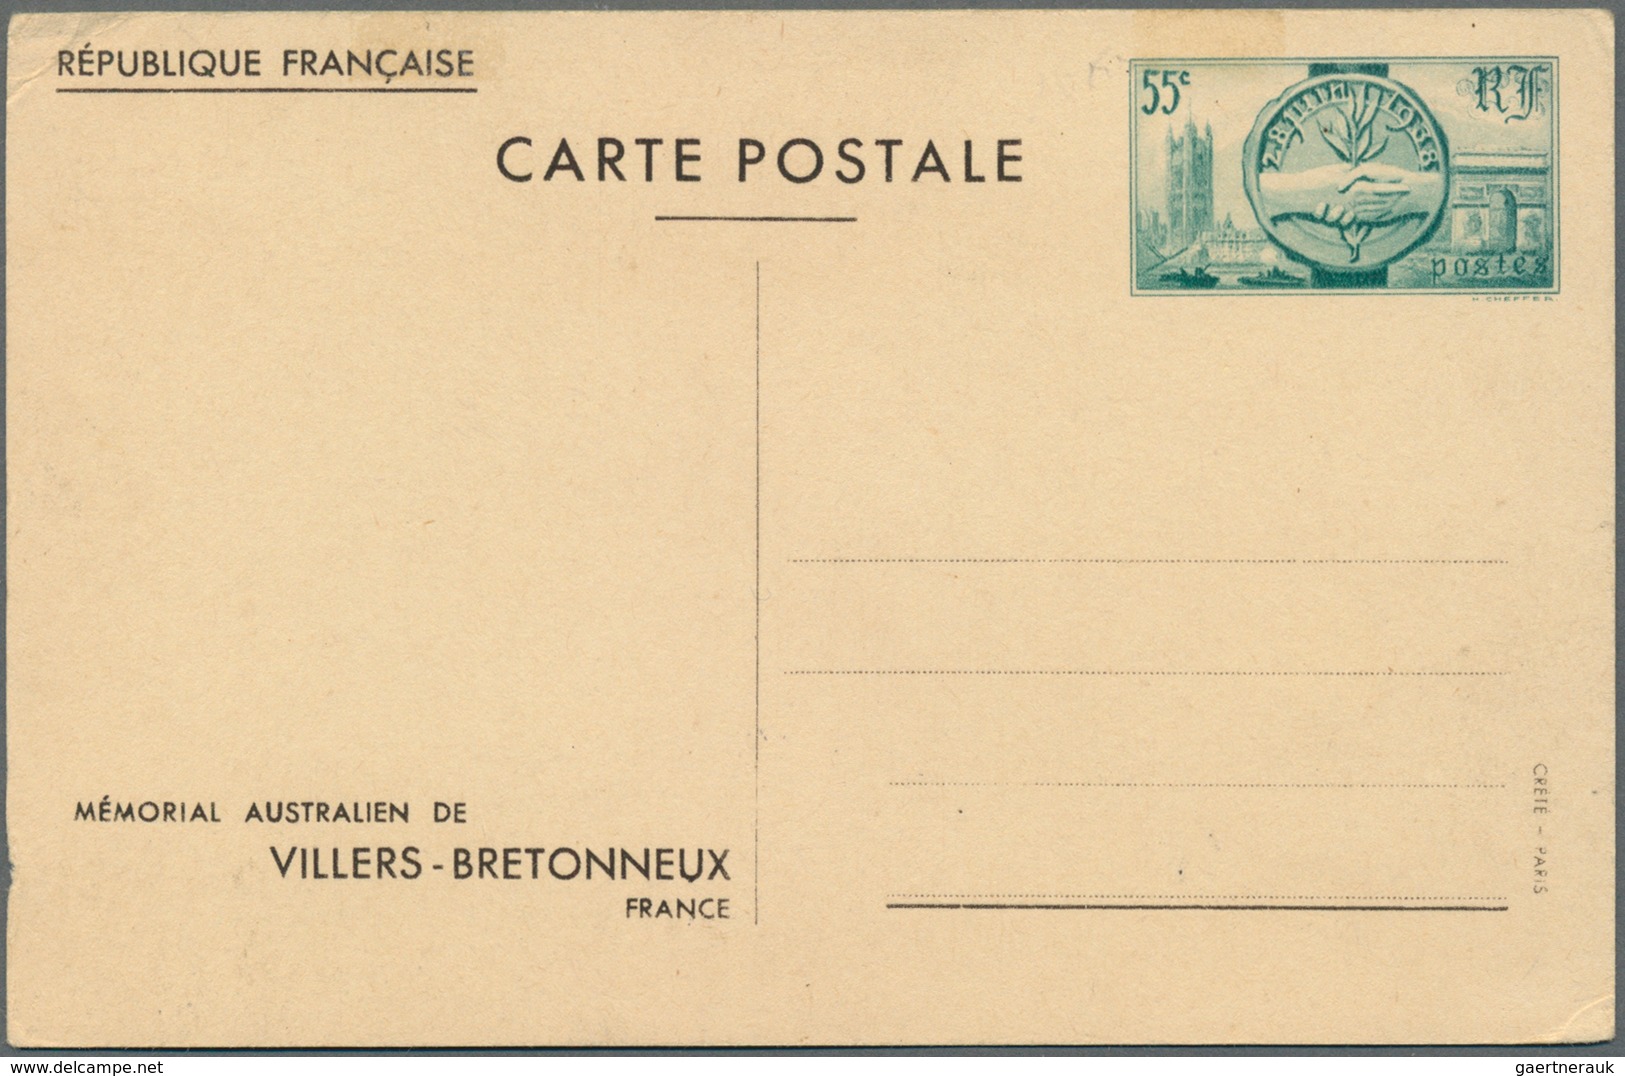 Frankreich - Ganzsachen: 1924/1966, assortment of 28 mainly used stationery cards incl. better comme